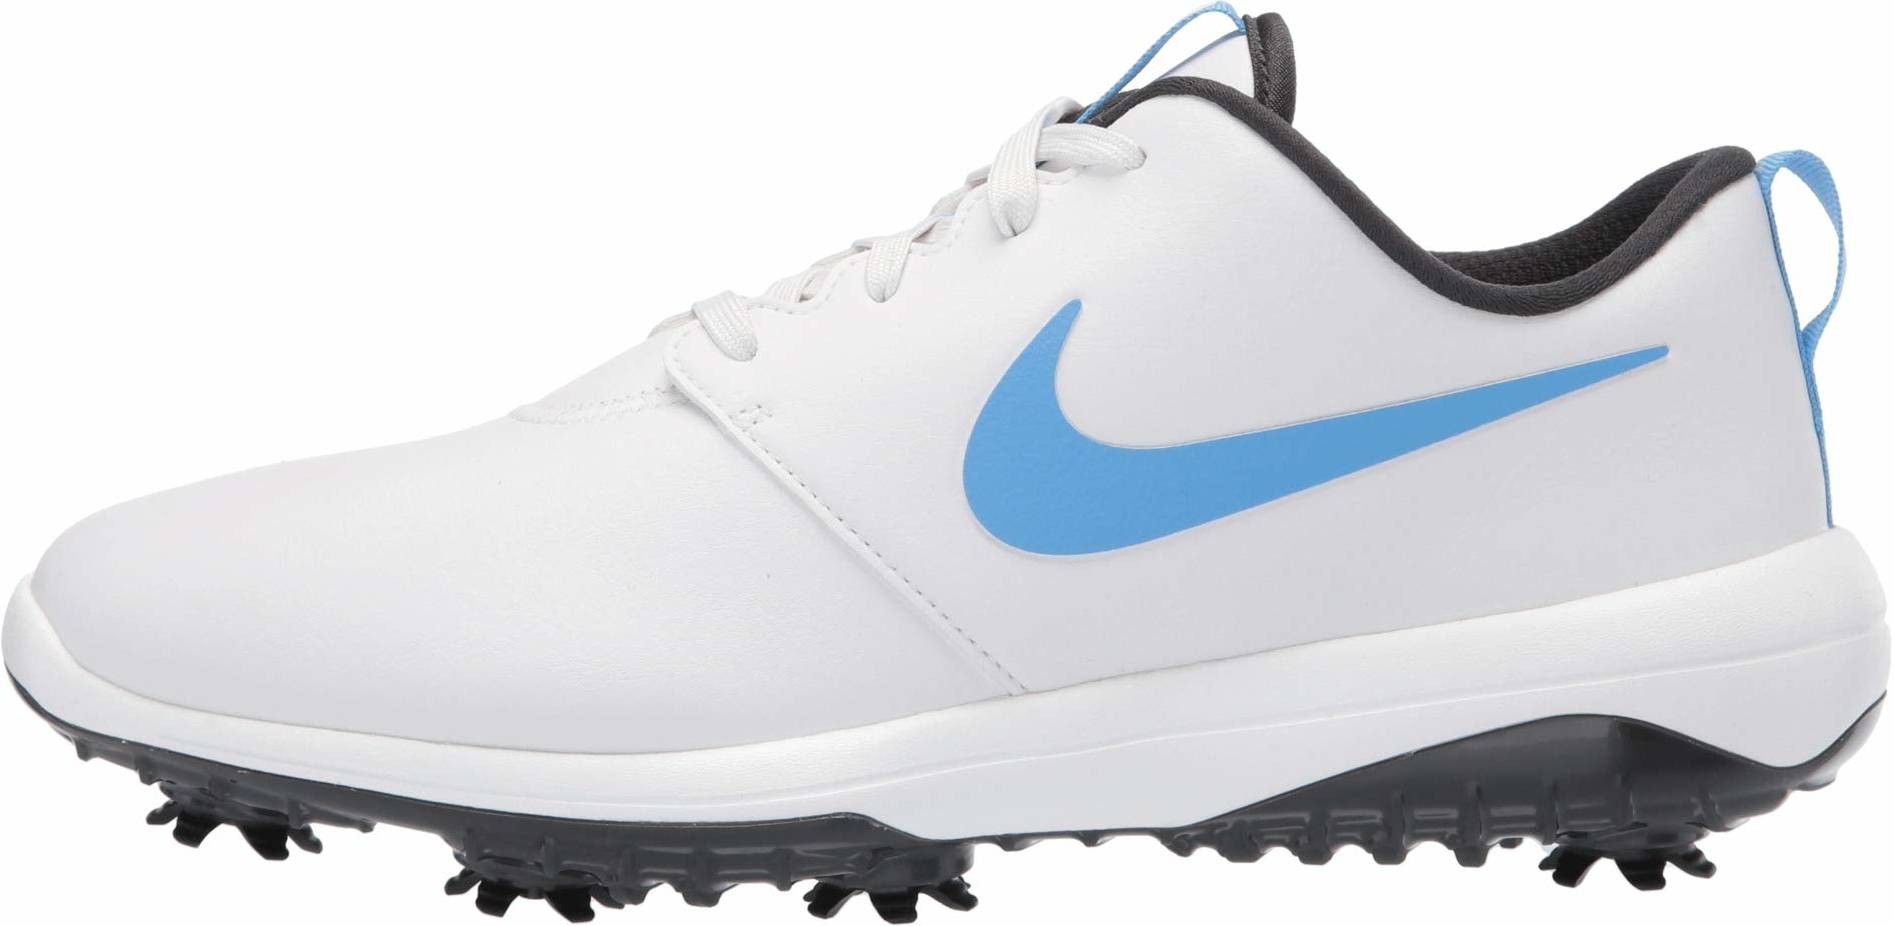 Save 37% on Nike Golf Shoes (16 Models 